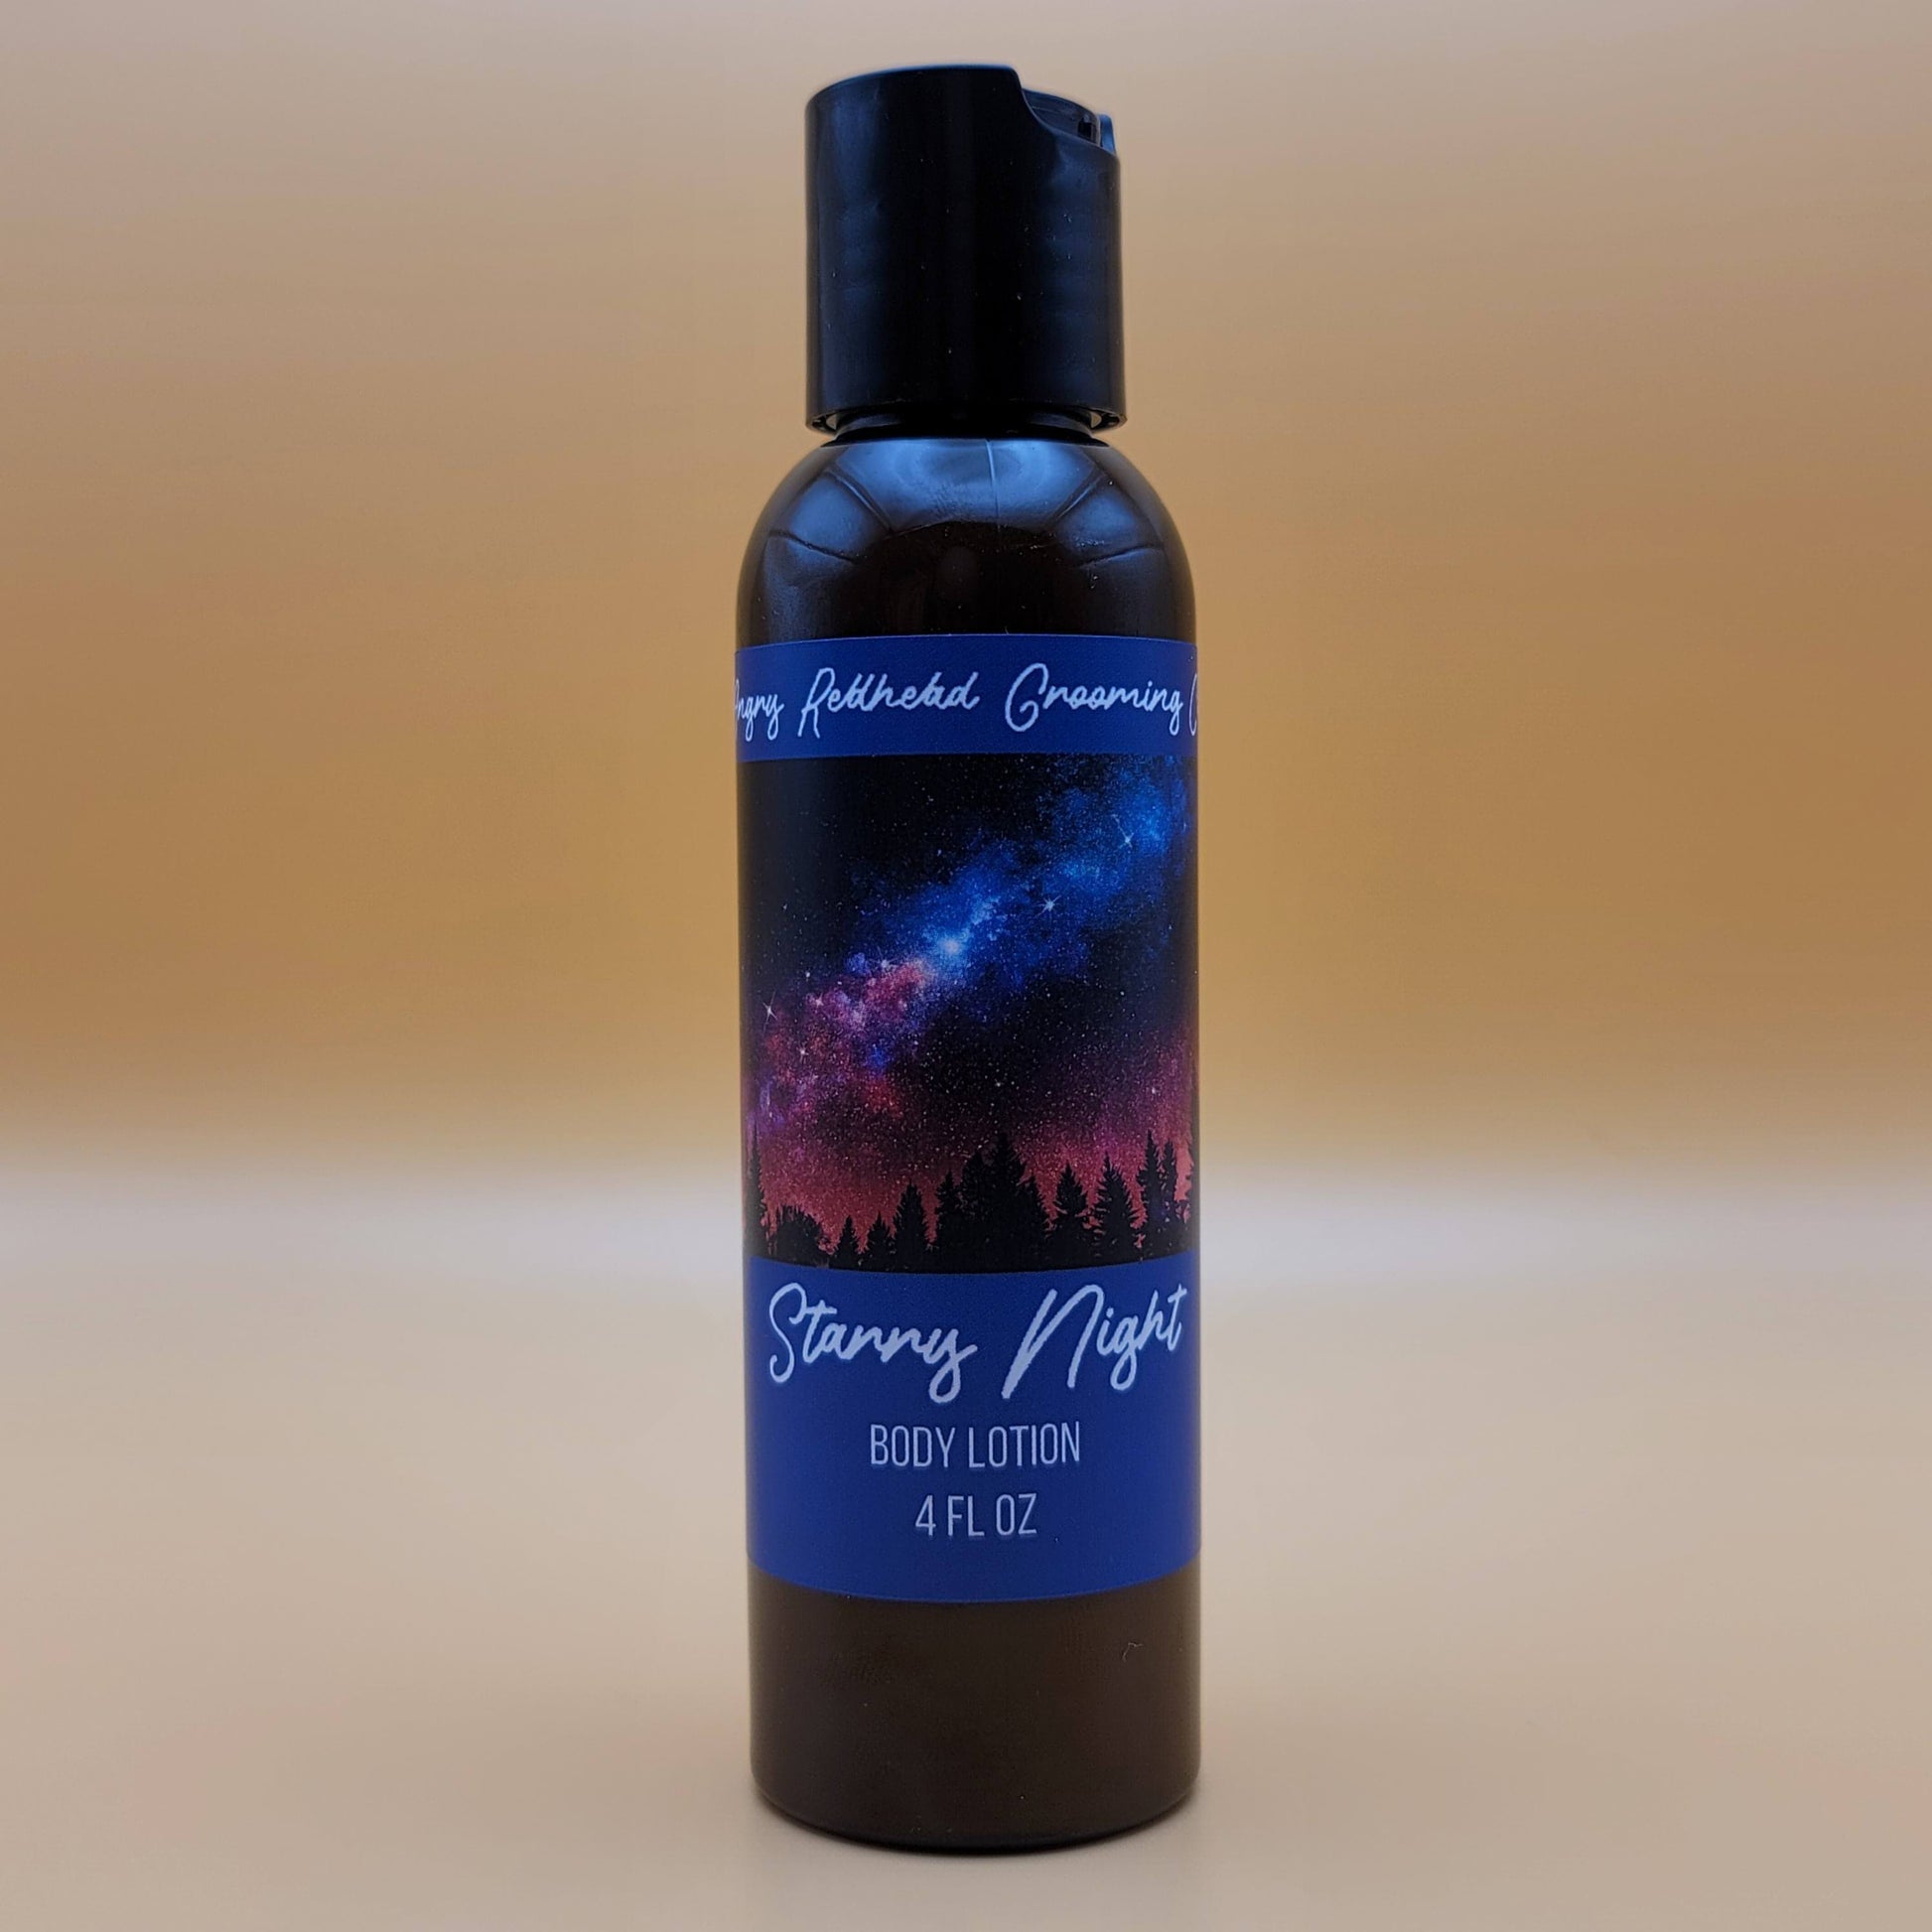 Starry Night Body Lotion by Angry Redhead Grooming Co - angryredheadgrooming.com